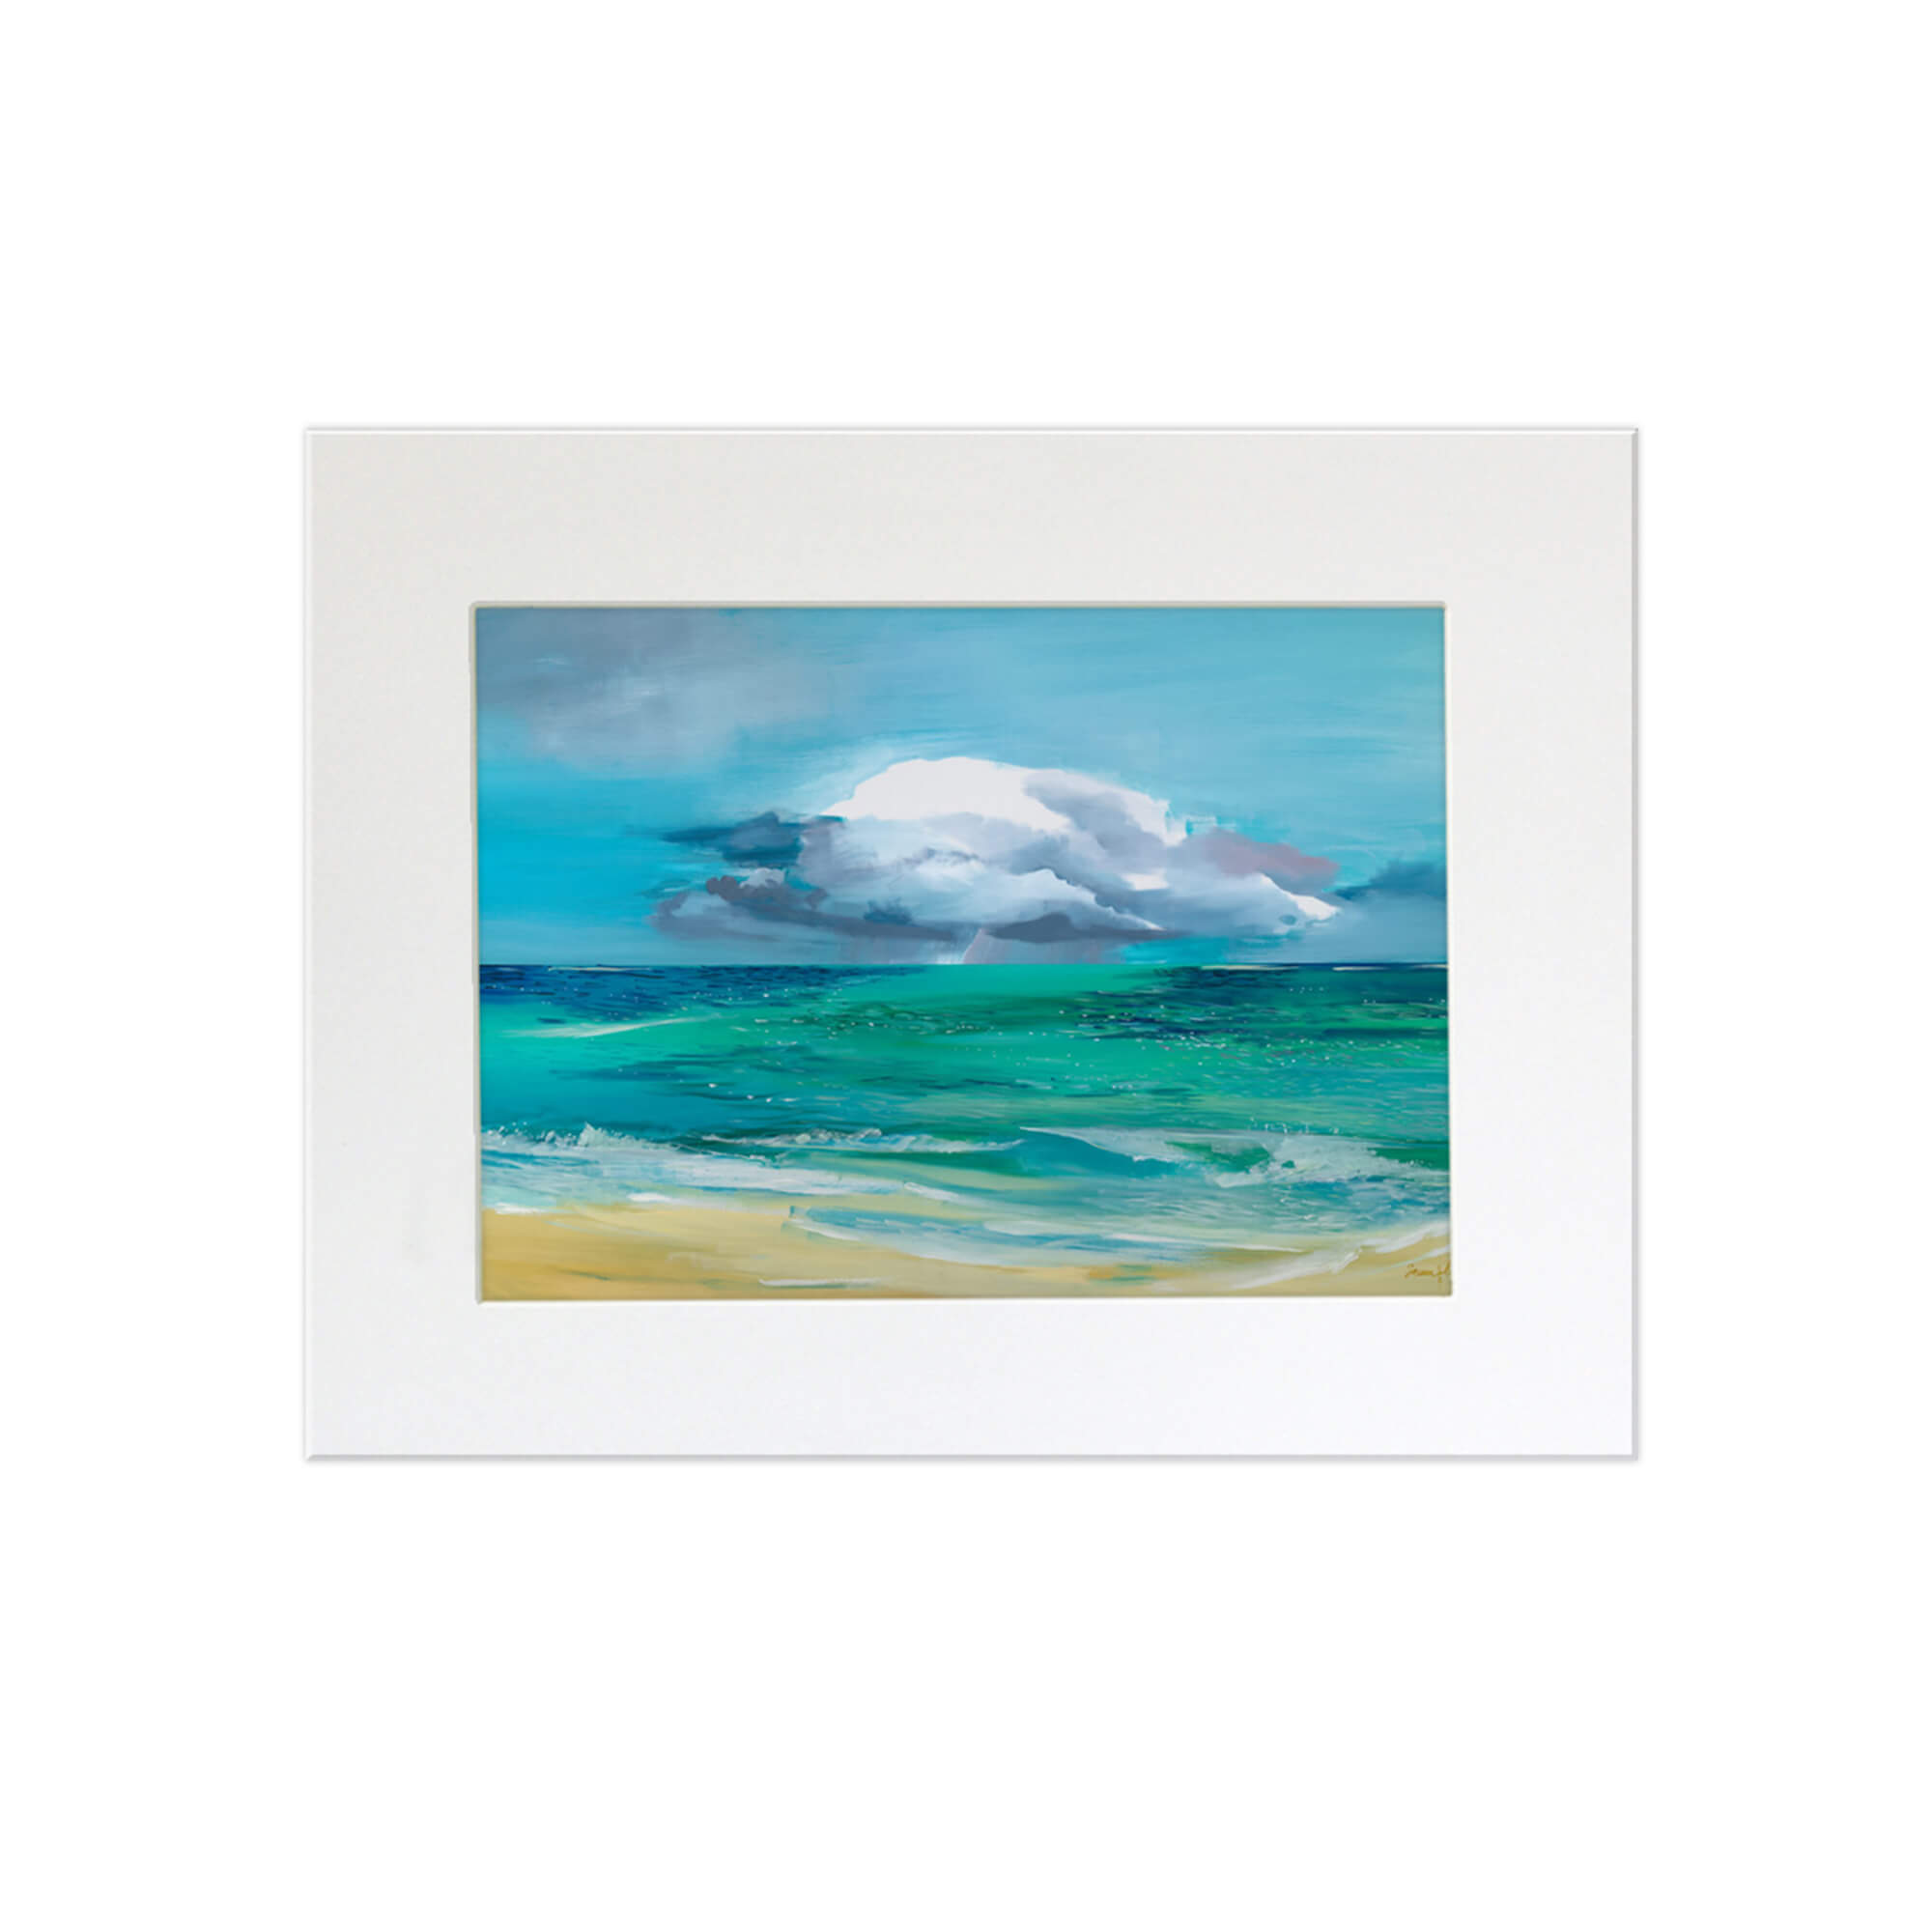 A matted art print depicting calm tranquil waters leading to a beach oasis by Hawaii artist Saumolia Puapuaga